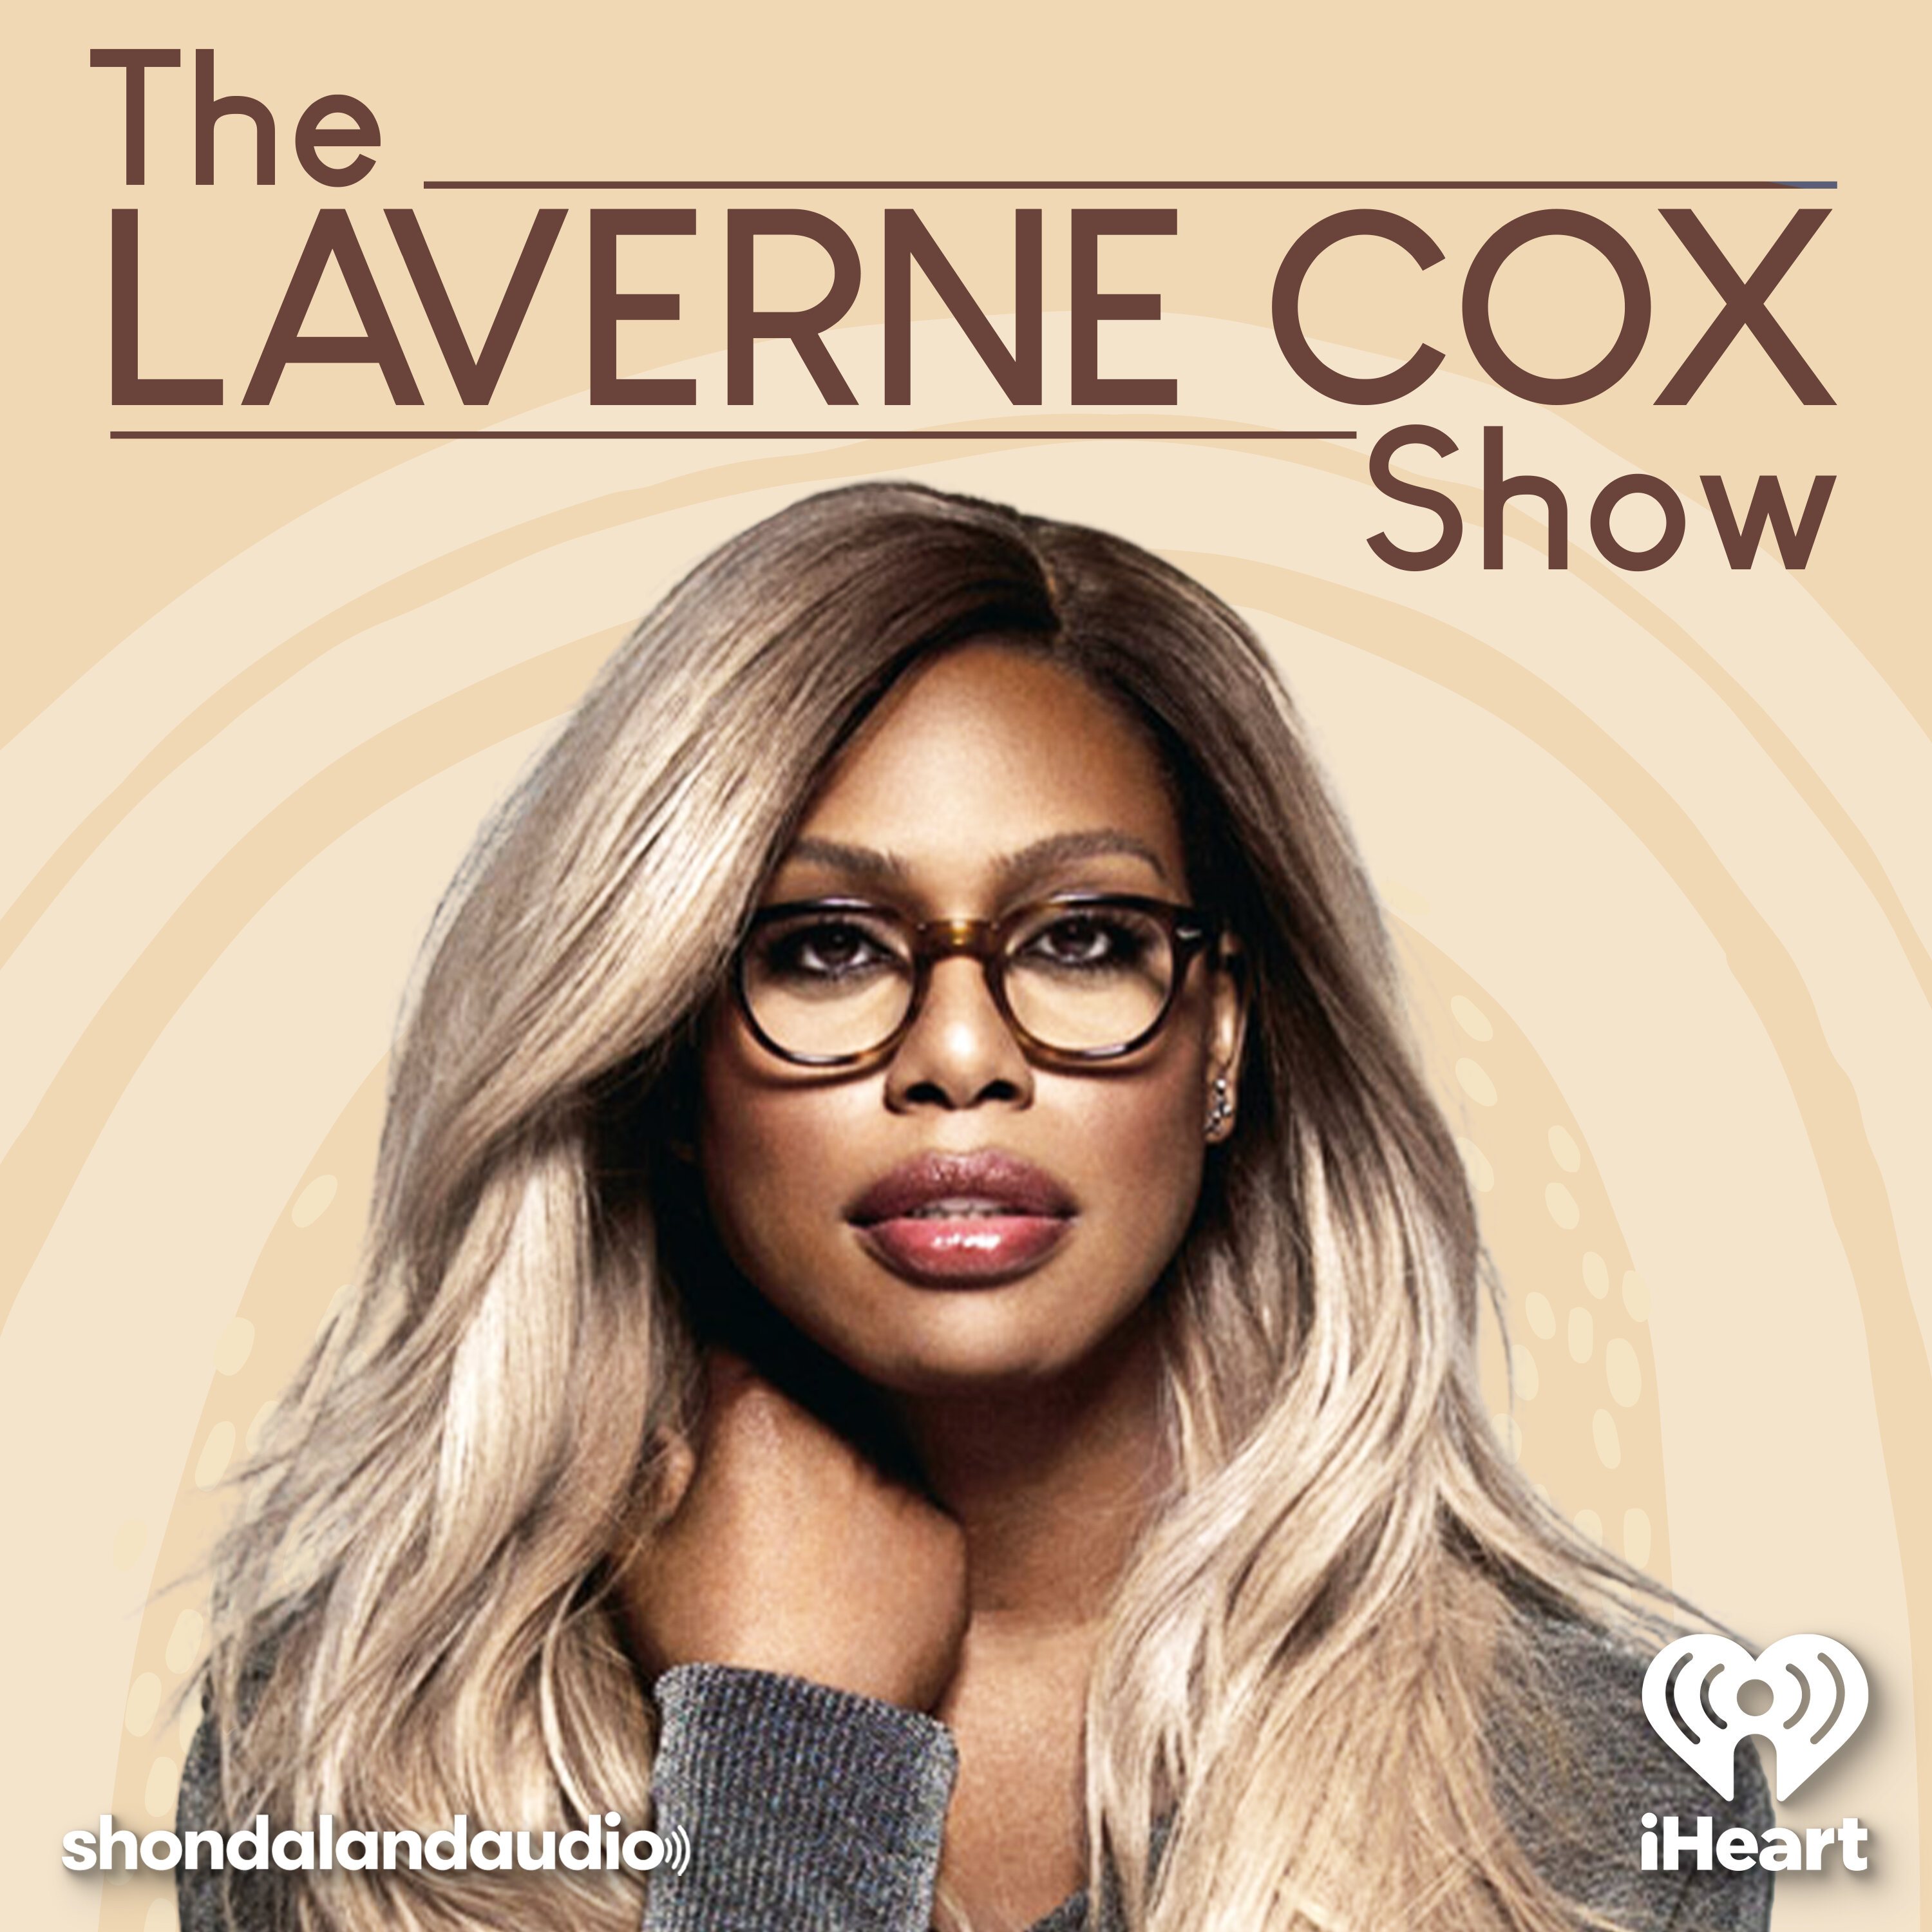 The Laverne Cox Show podcast show image